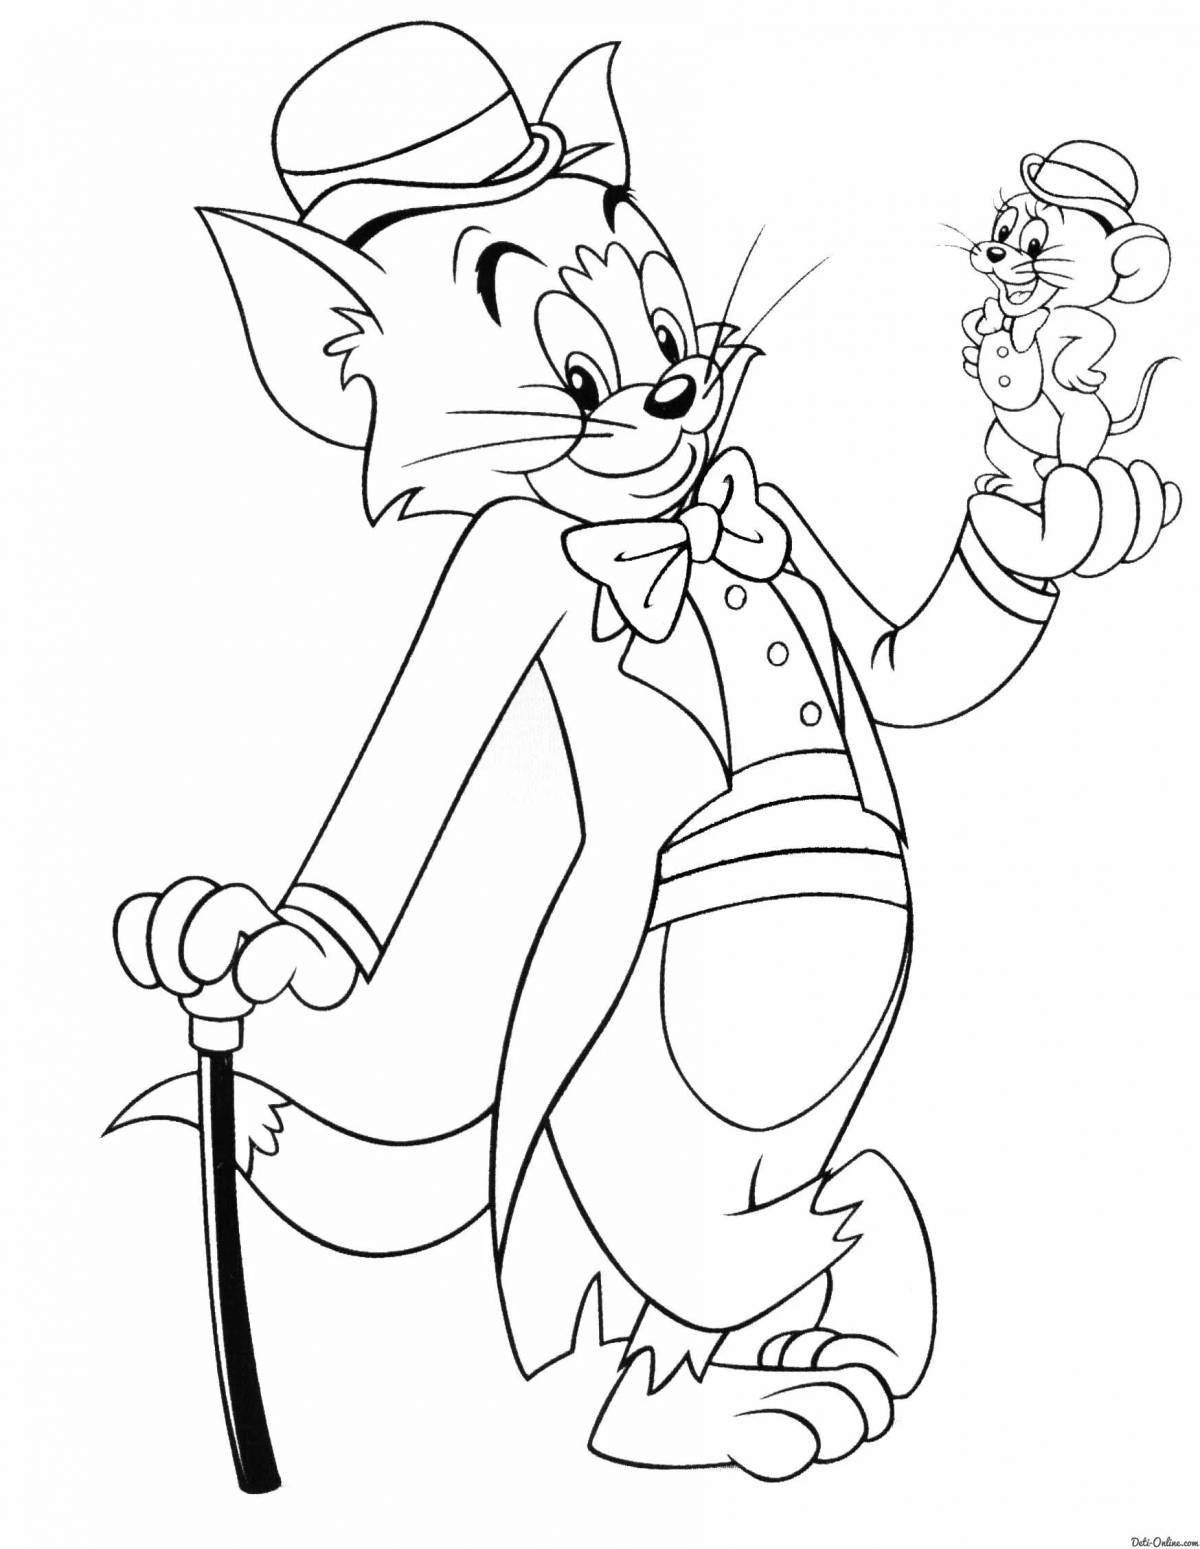 Amusing tom and jerry coloring book